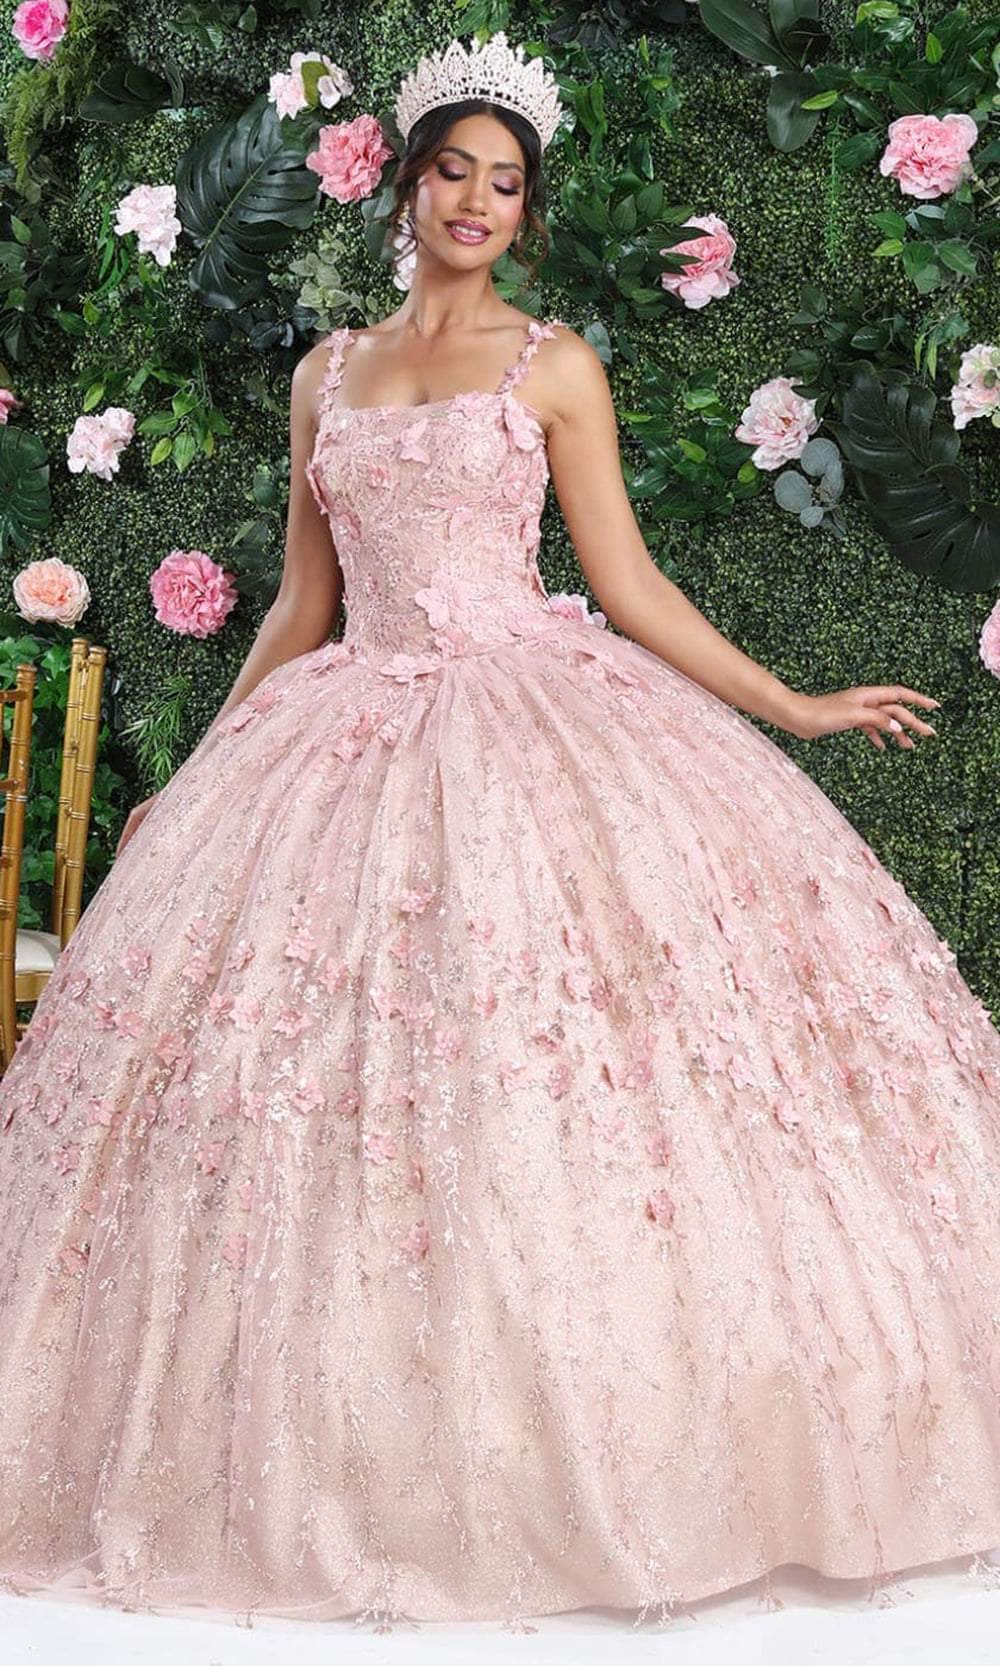 May Queen LK208 - Straight-Across Applique Ballgown Quinceanera Dresses 4 / Rose Gold